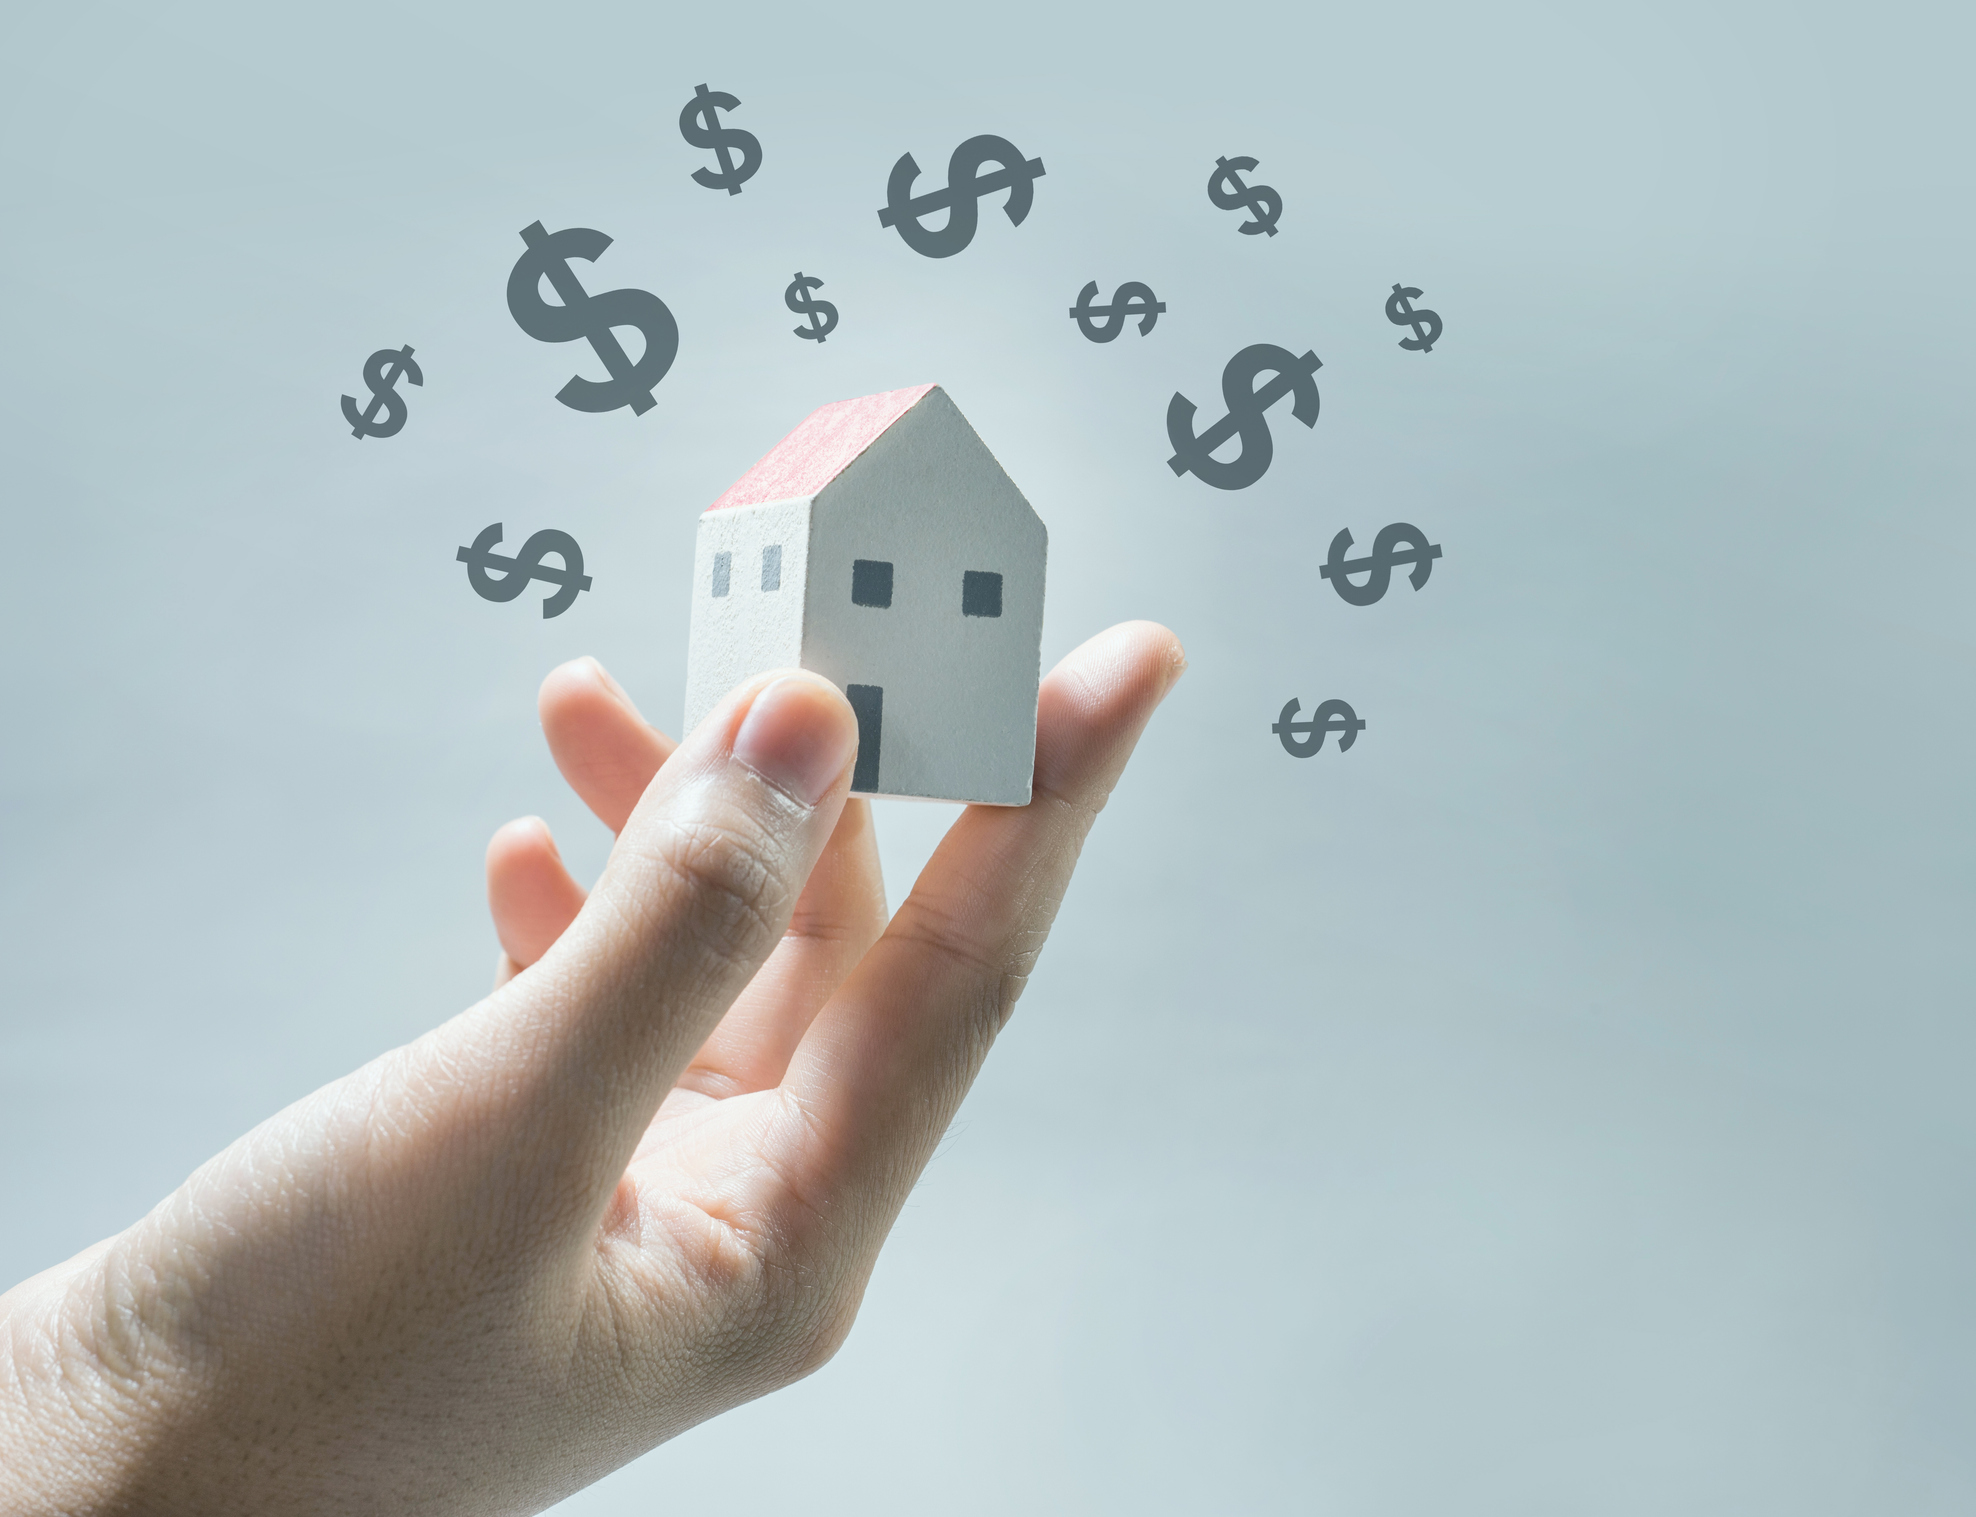 Consider Investing in Real Estate